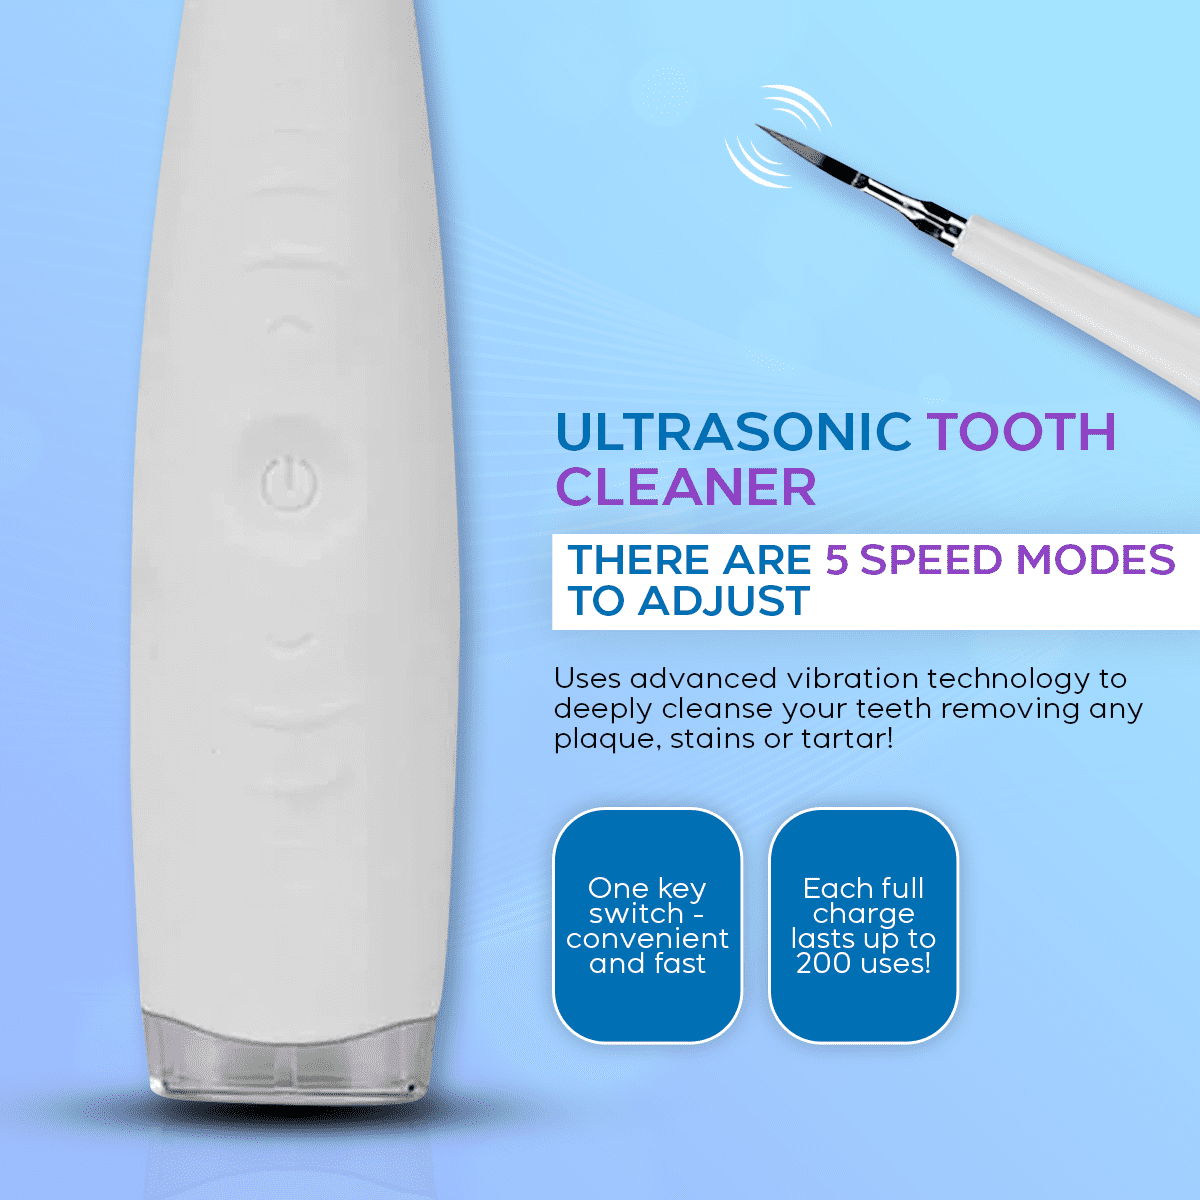 Ultrasonic Tooth Cleaner - Remove Tartar At Home